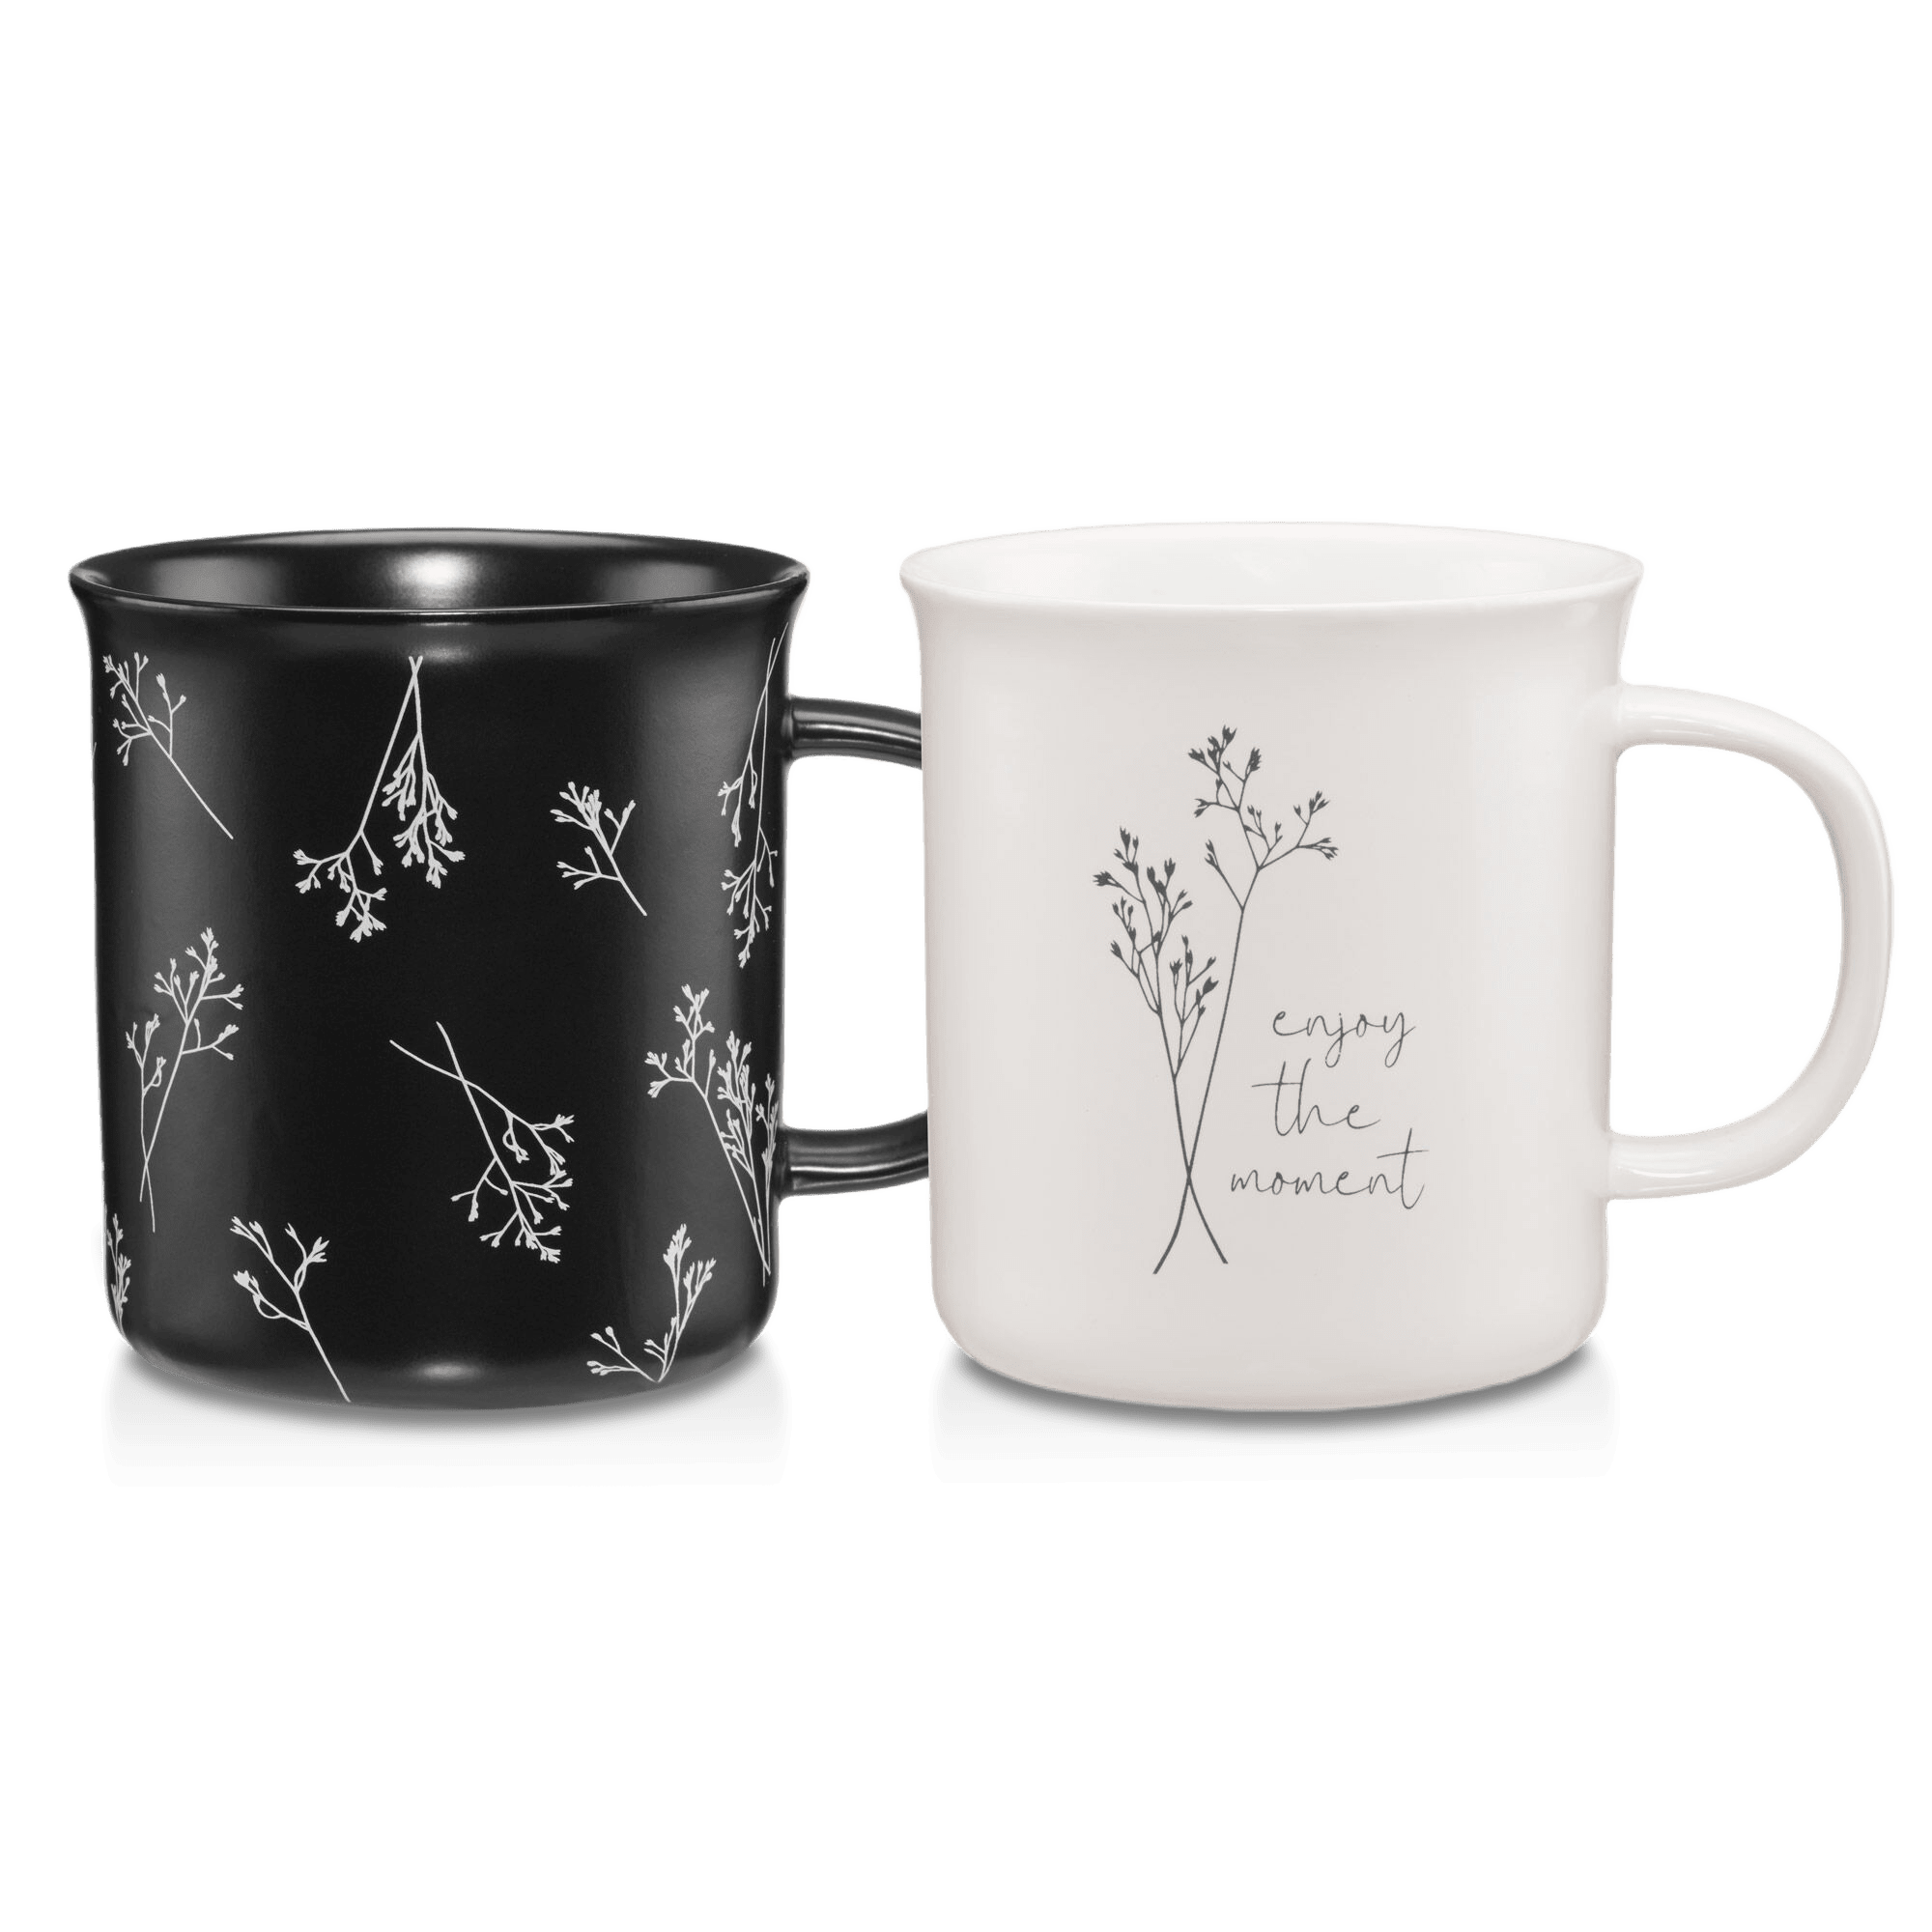 Set of 2 Mugs with Flowers and Writing